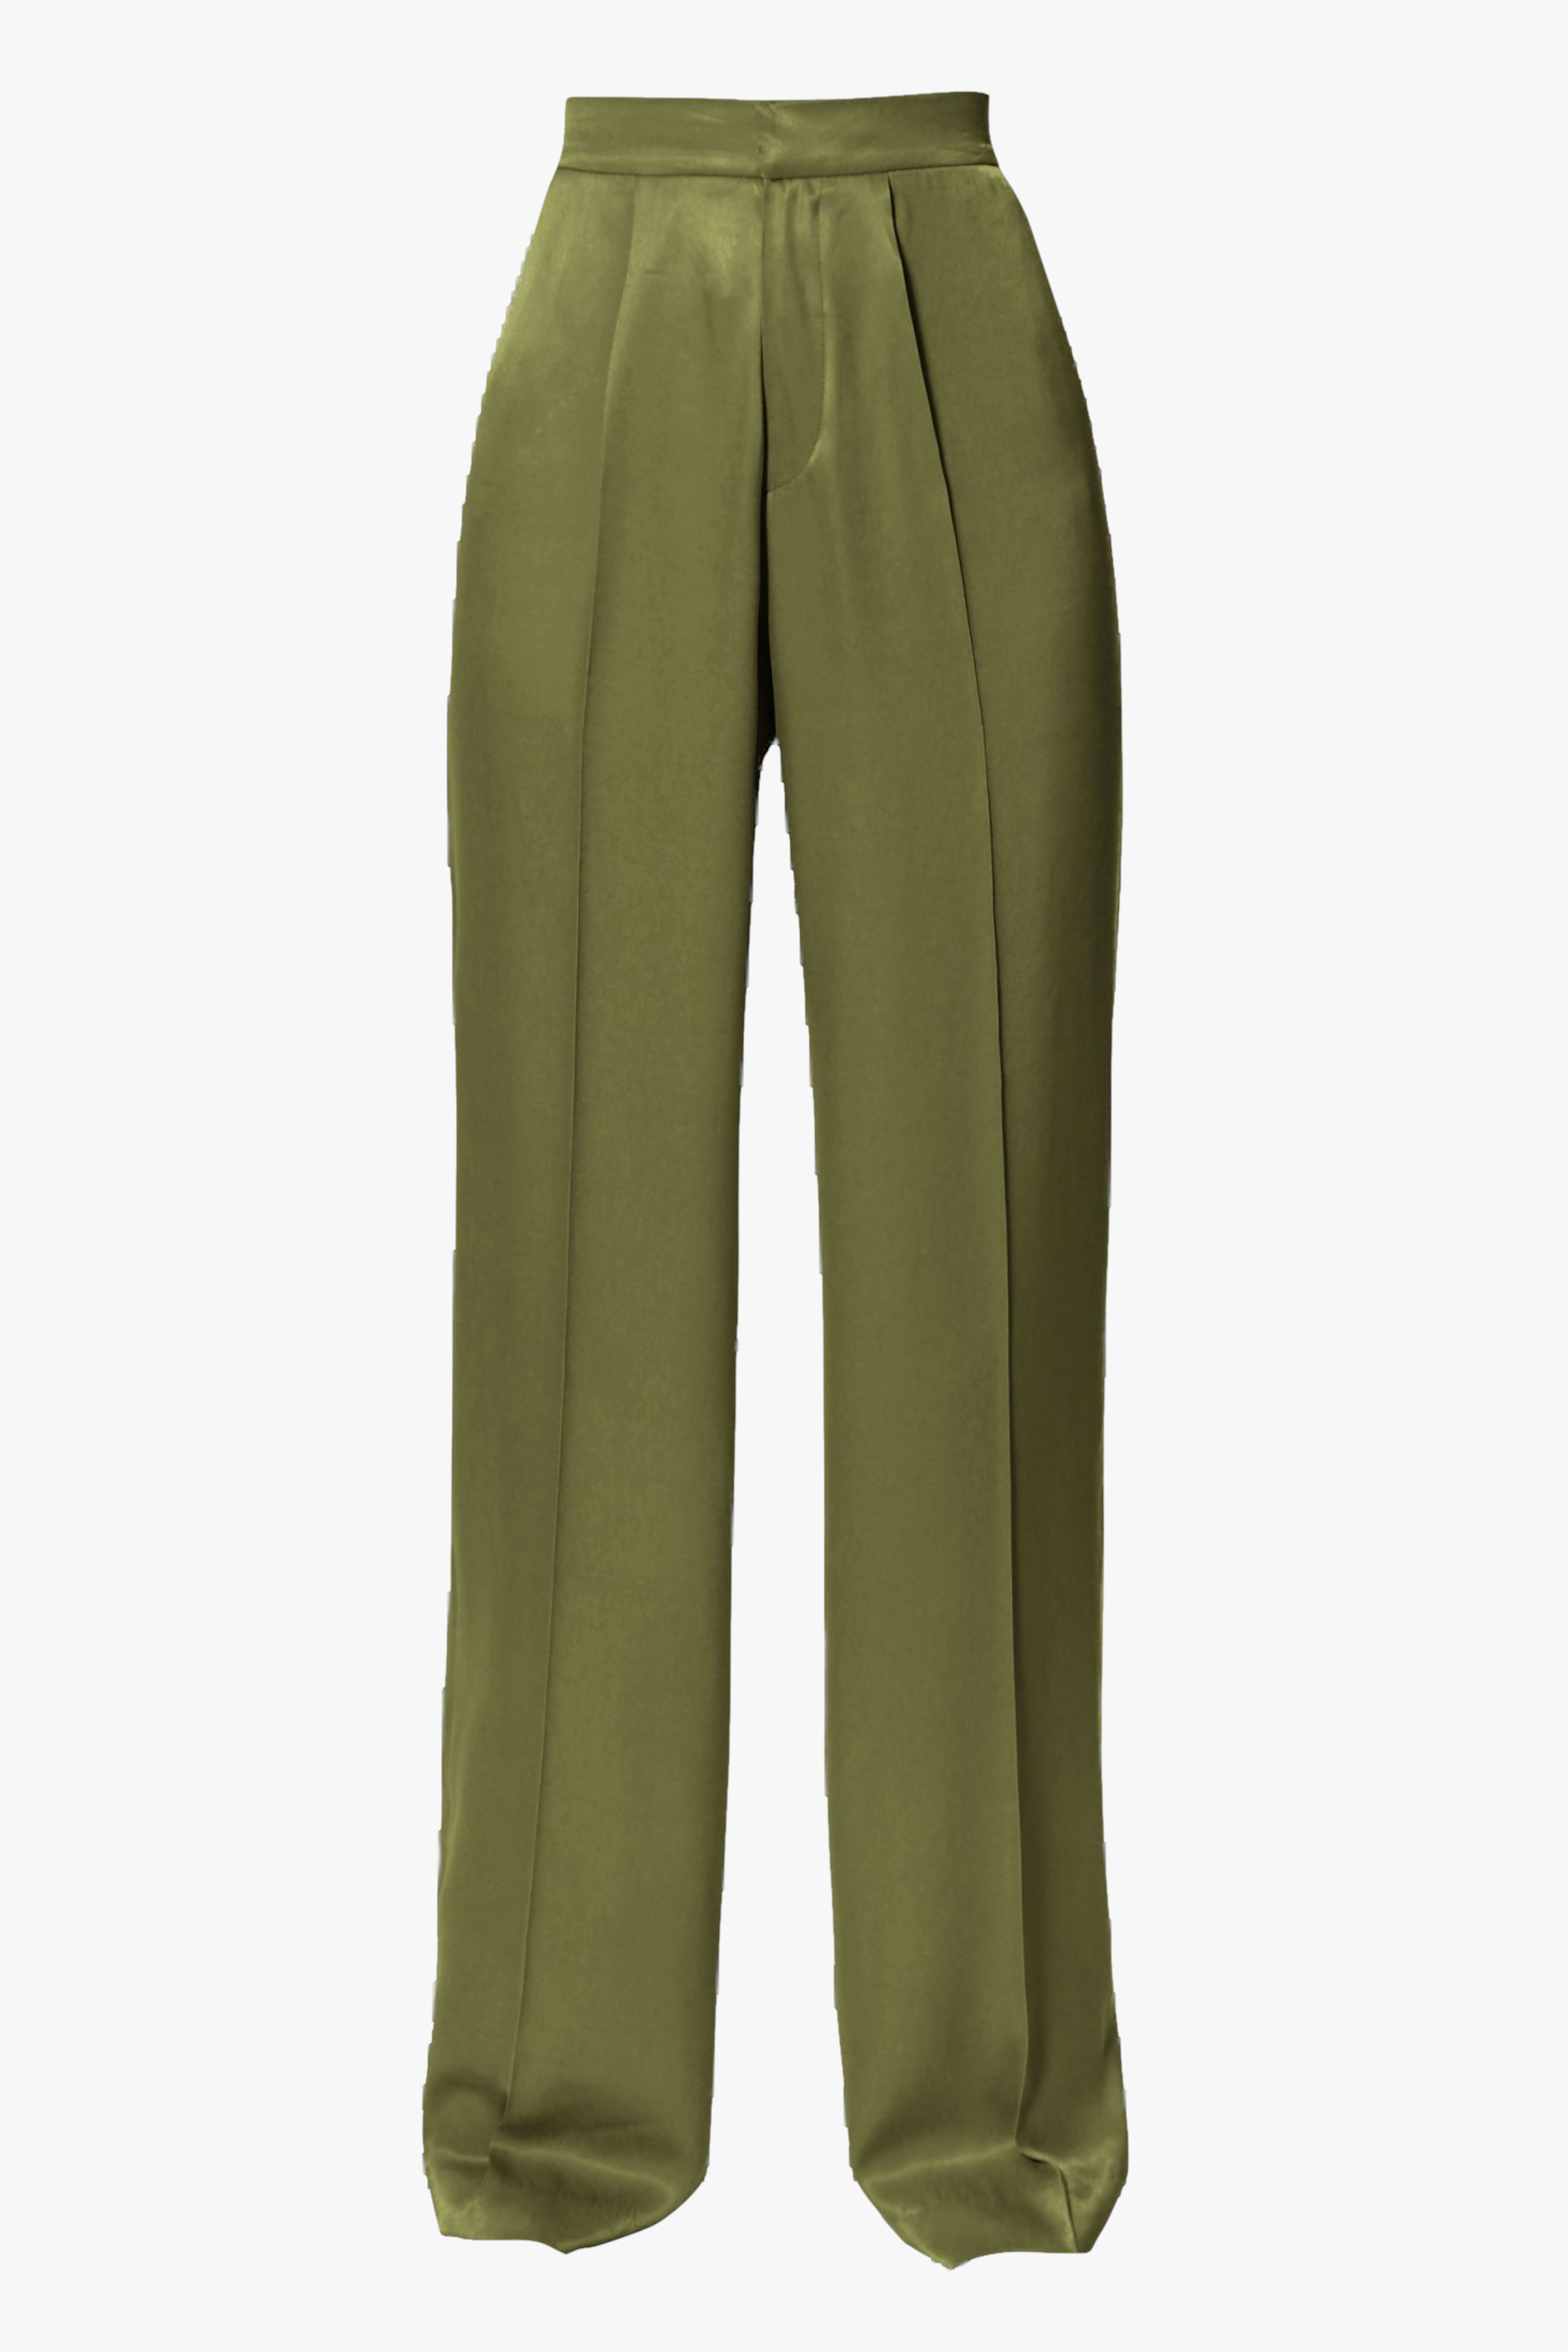 Shop Trousers Jessie Satin Olive Branch from AGGI at Seezona